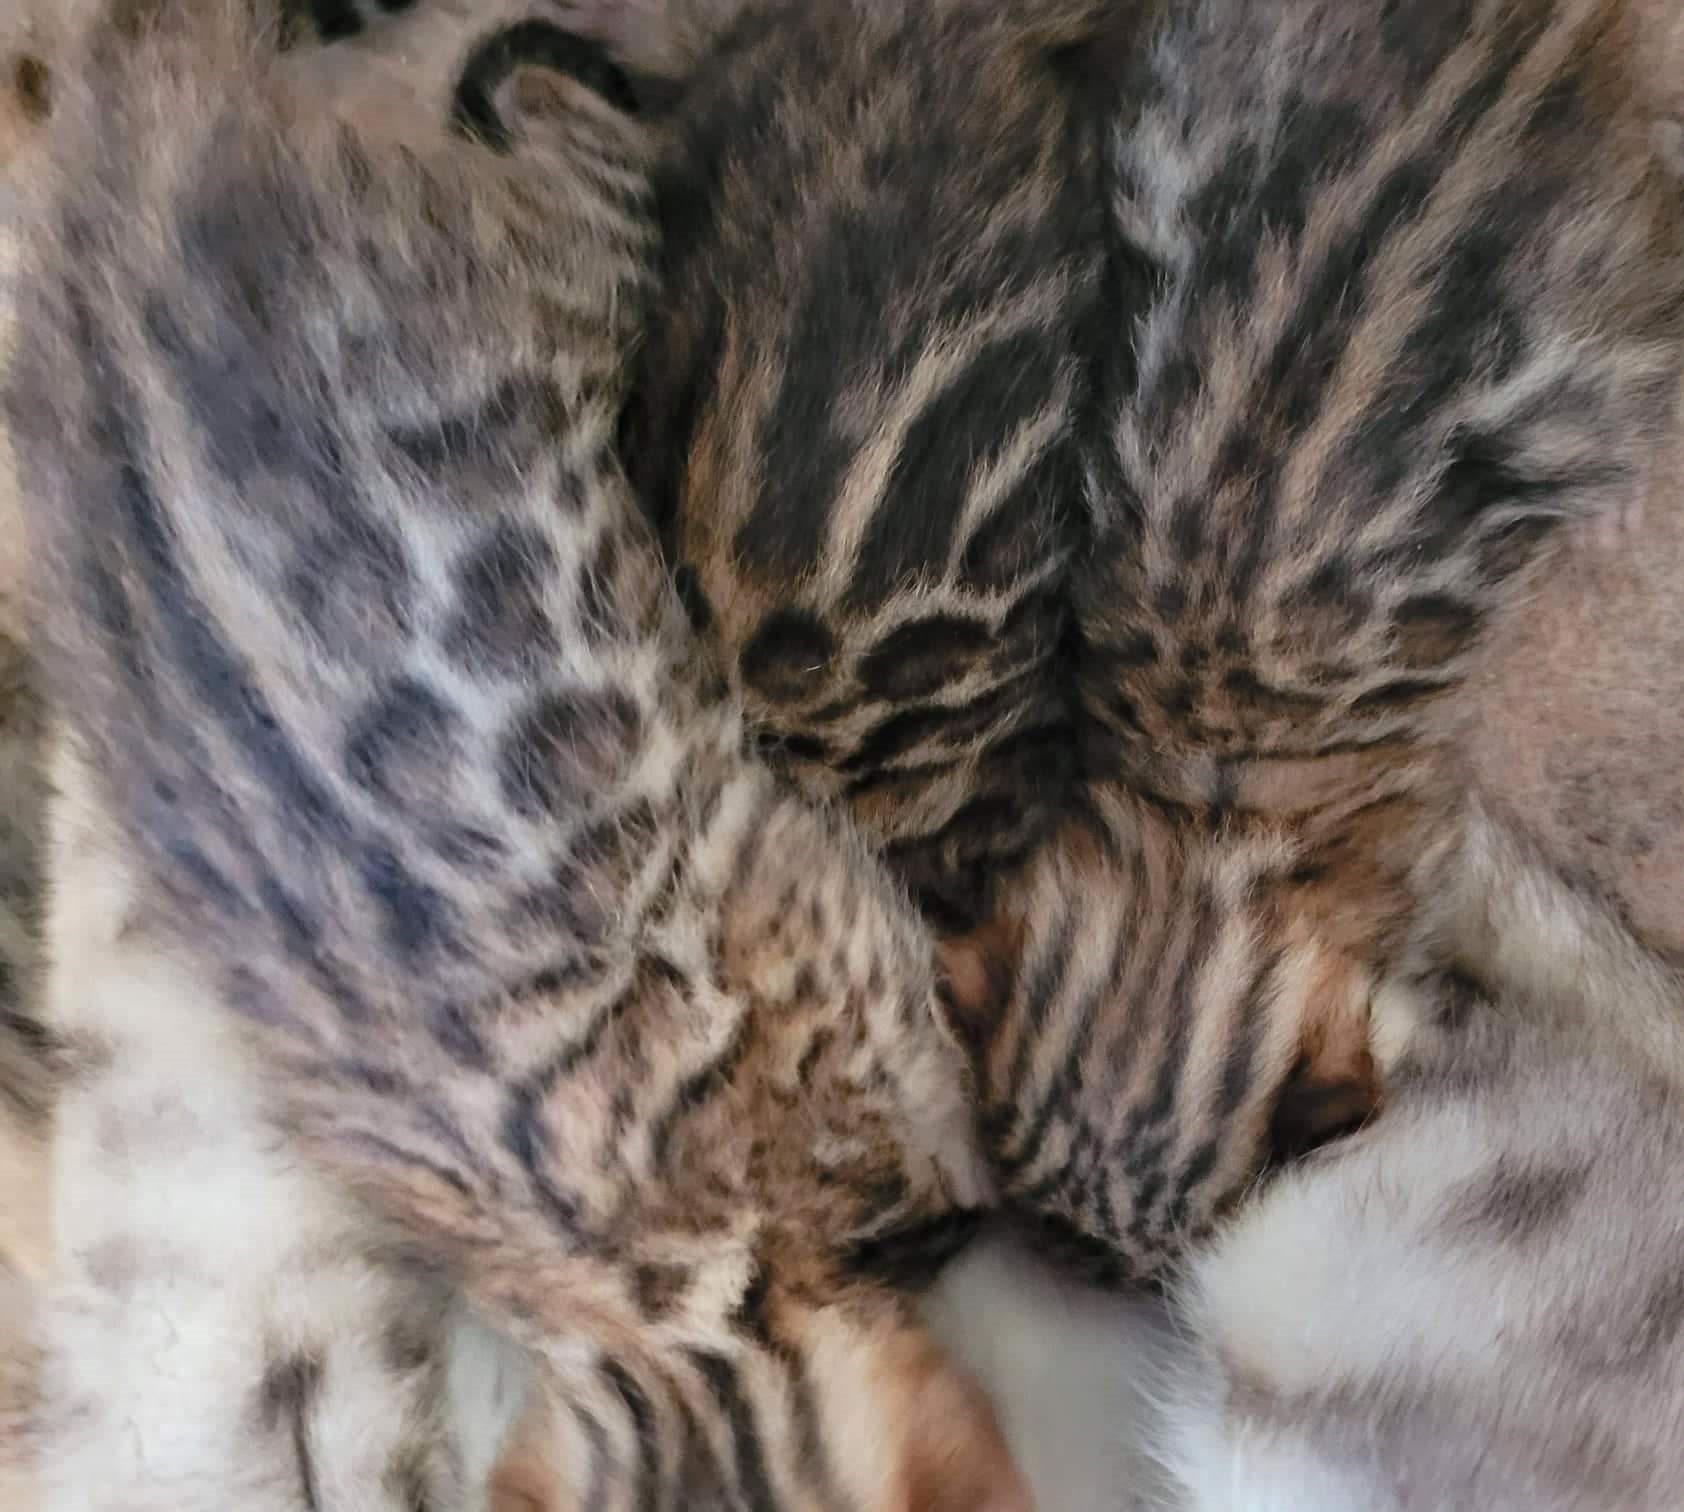 Photo 3 of Carol and her 5 Babies the Bengal kitten.